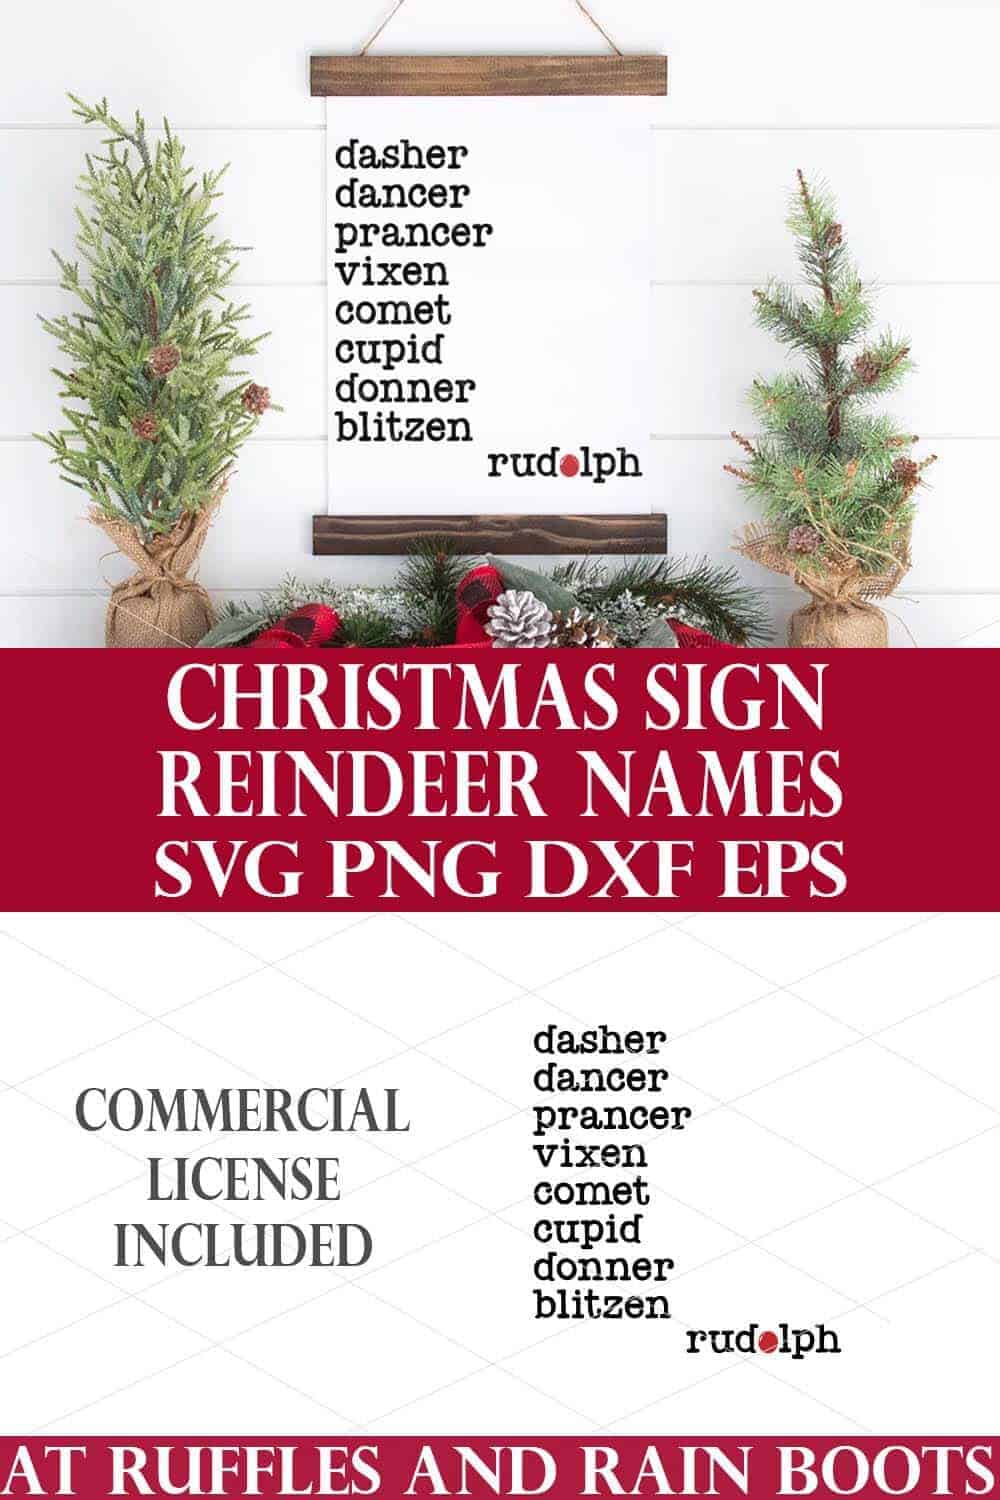 vertical collage of Christmas sign SVG from ruffles and rain boots of Santas reindeer names on a white scroll sign on wood wall